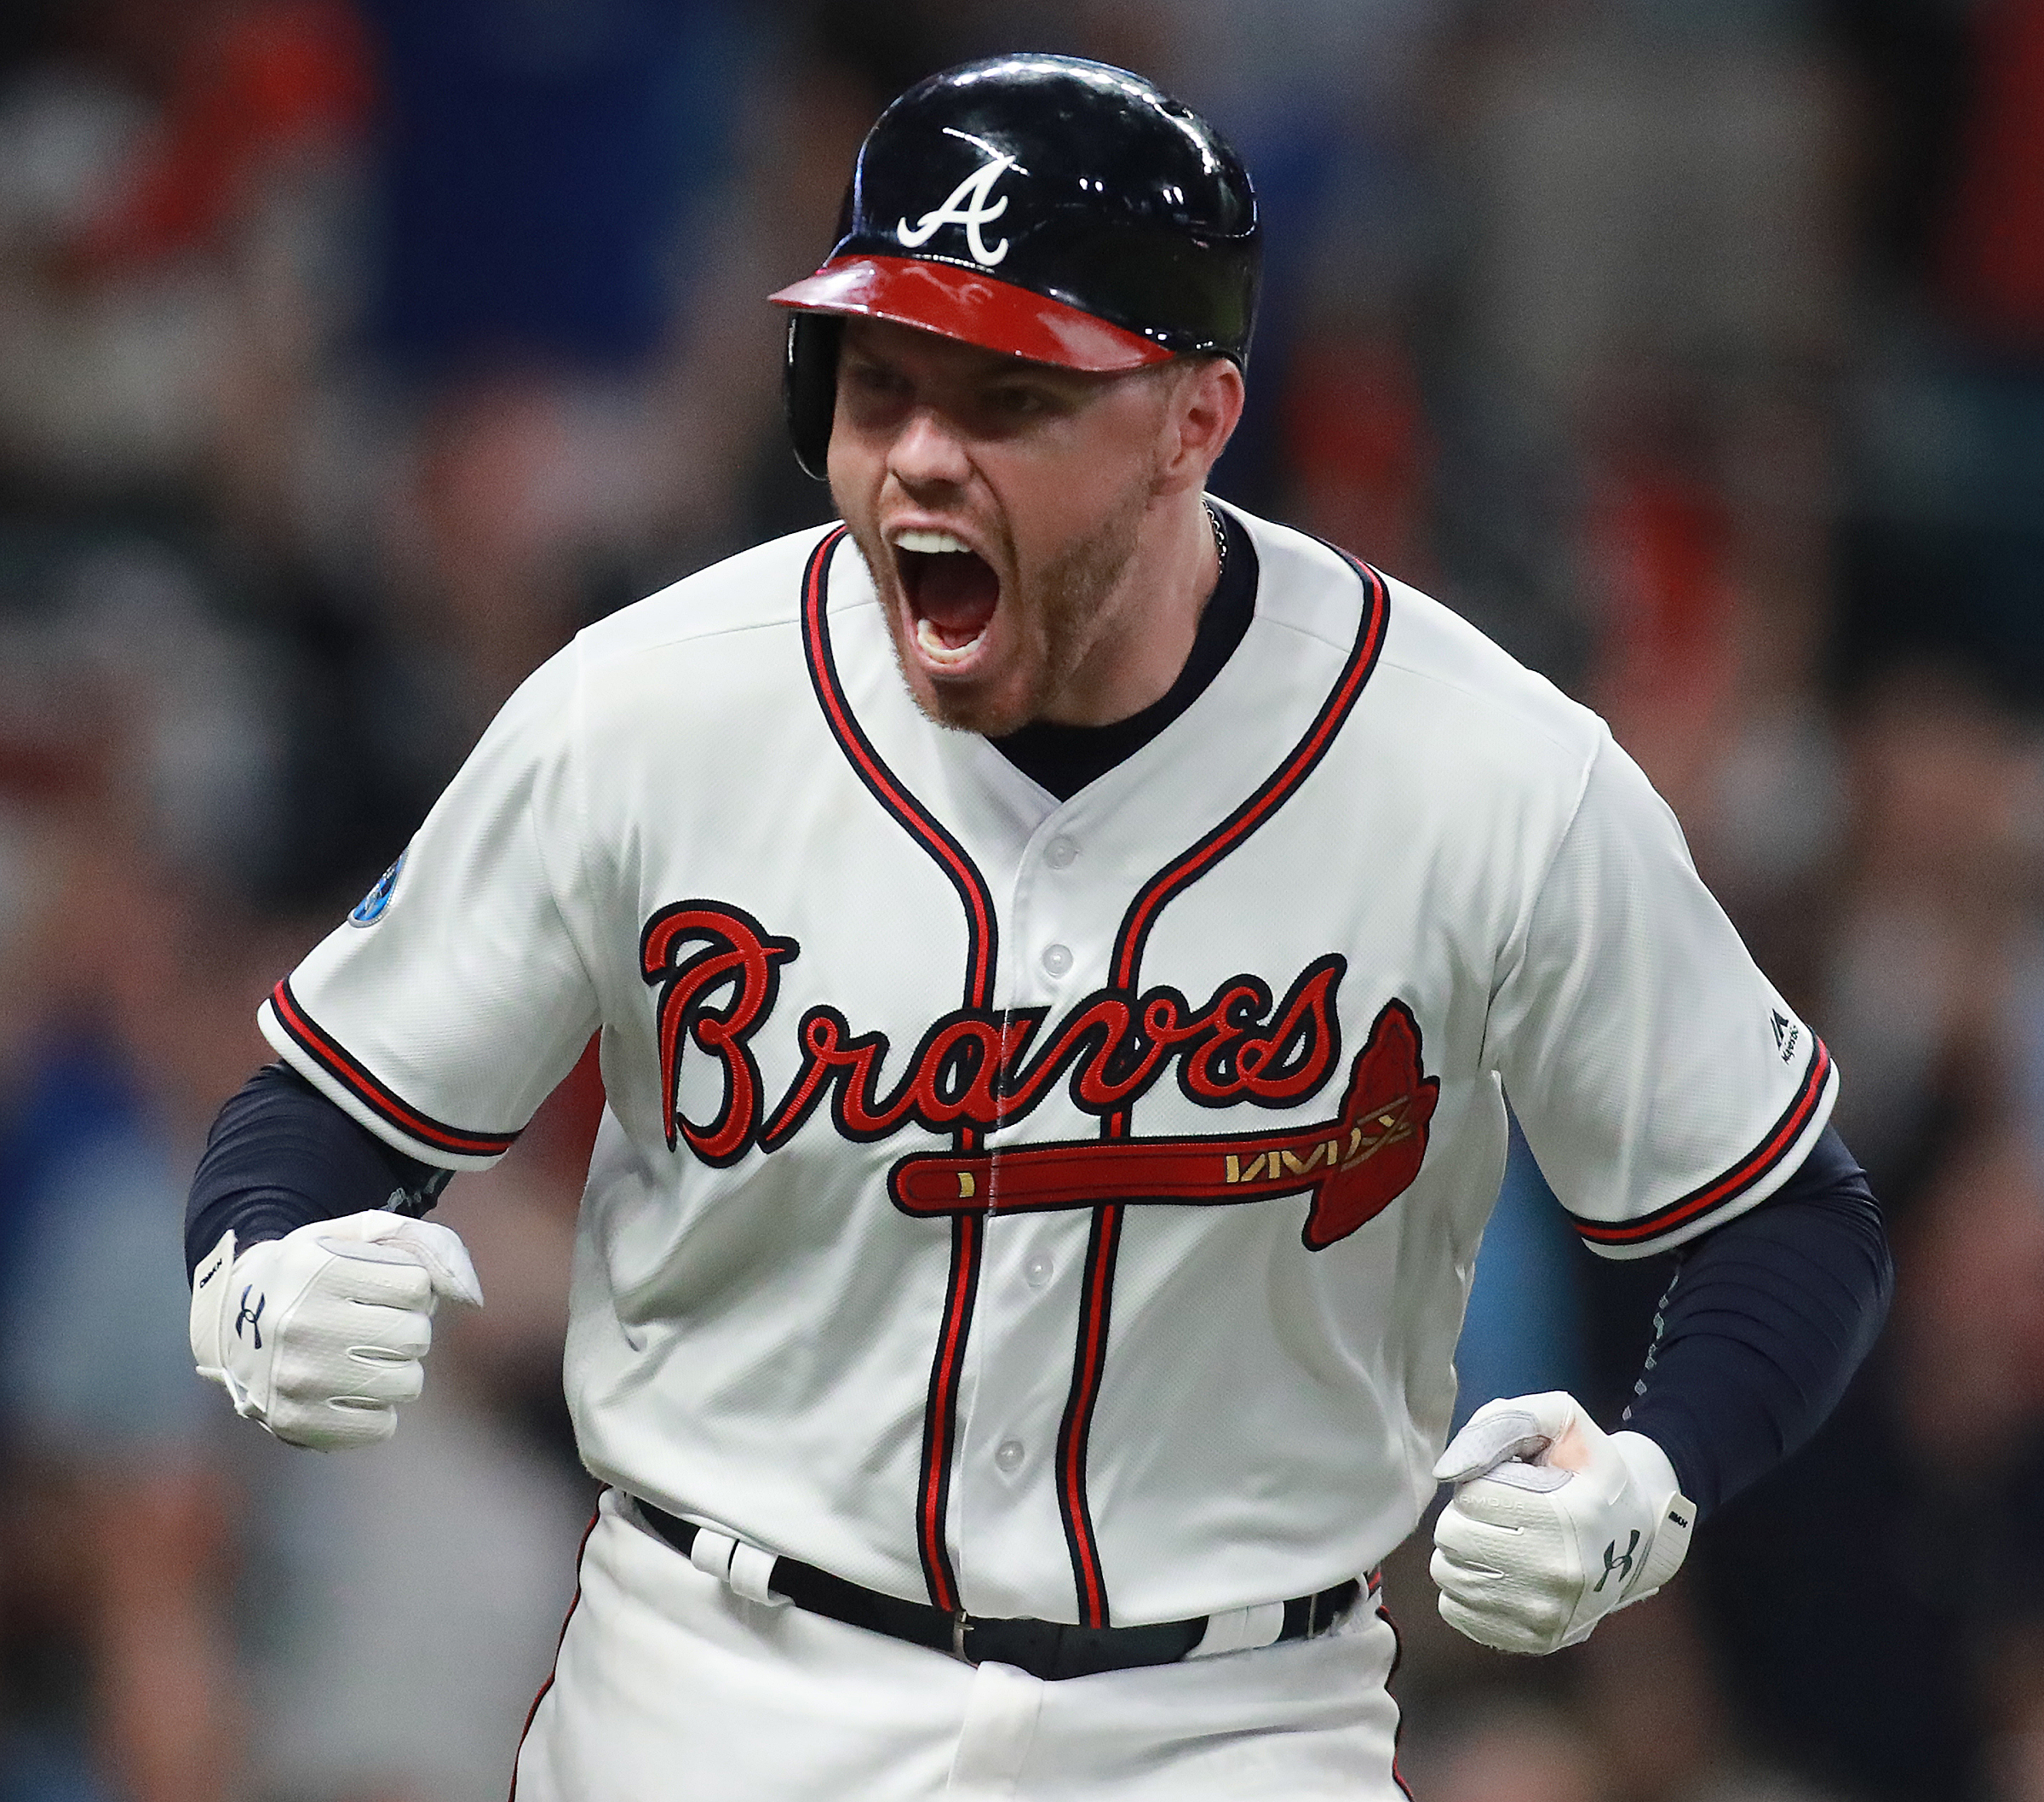 Fred-die!' does it: Freeman's homer lifts Braves over Dodgers in